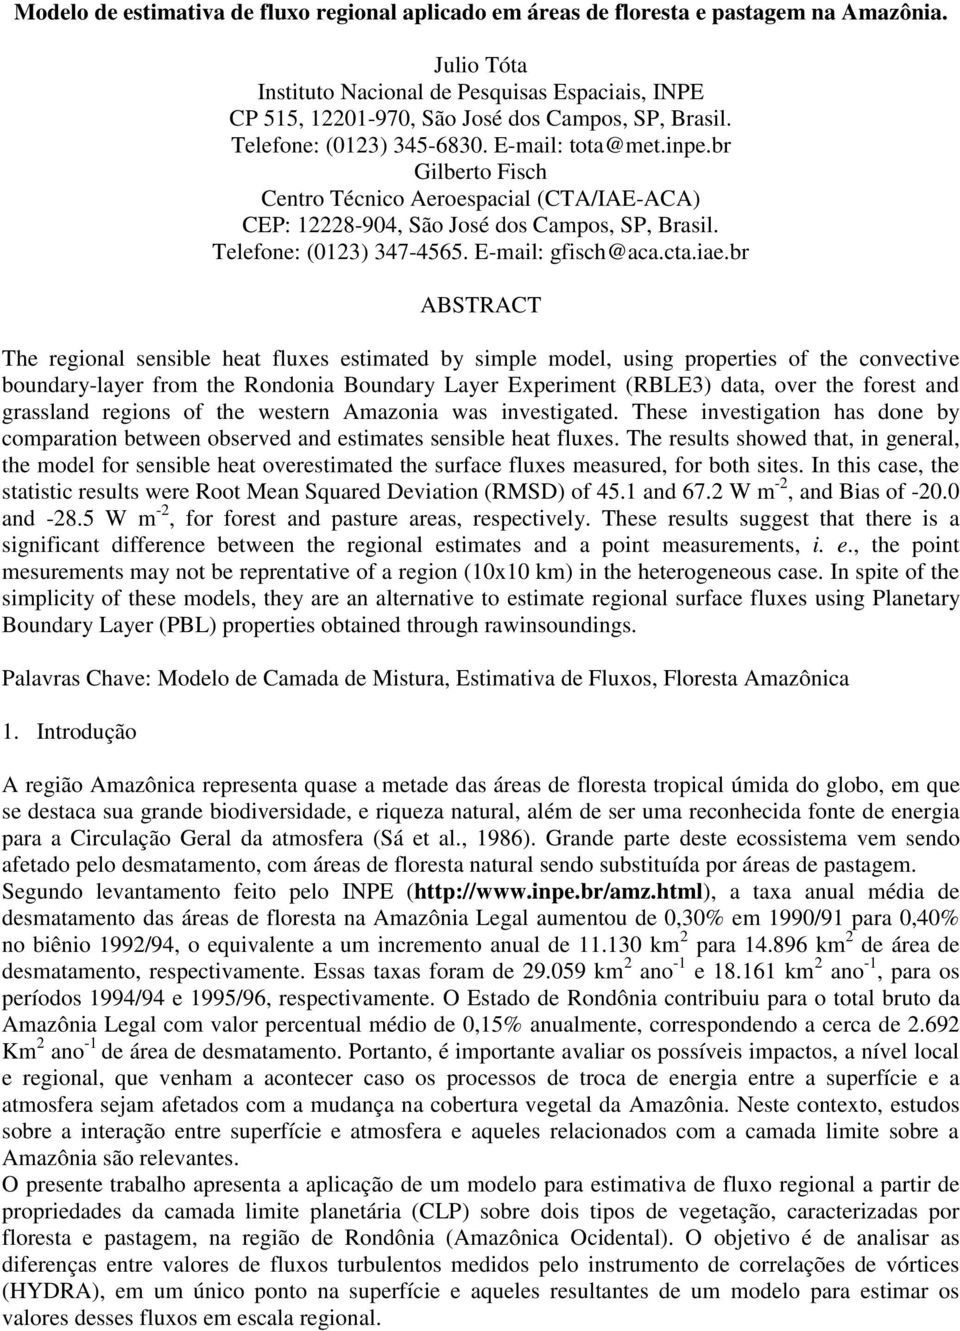 iae.br ABSTRACT The regional sensible heat fluxes estimated by simple model, using properties of the convective boundary-layer from the Rondonia Boundary Layer Experiment (RBLE3) data, over the